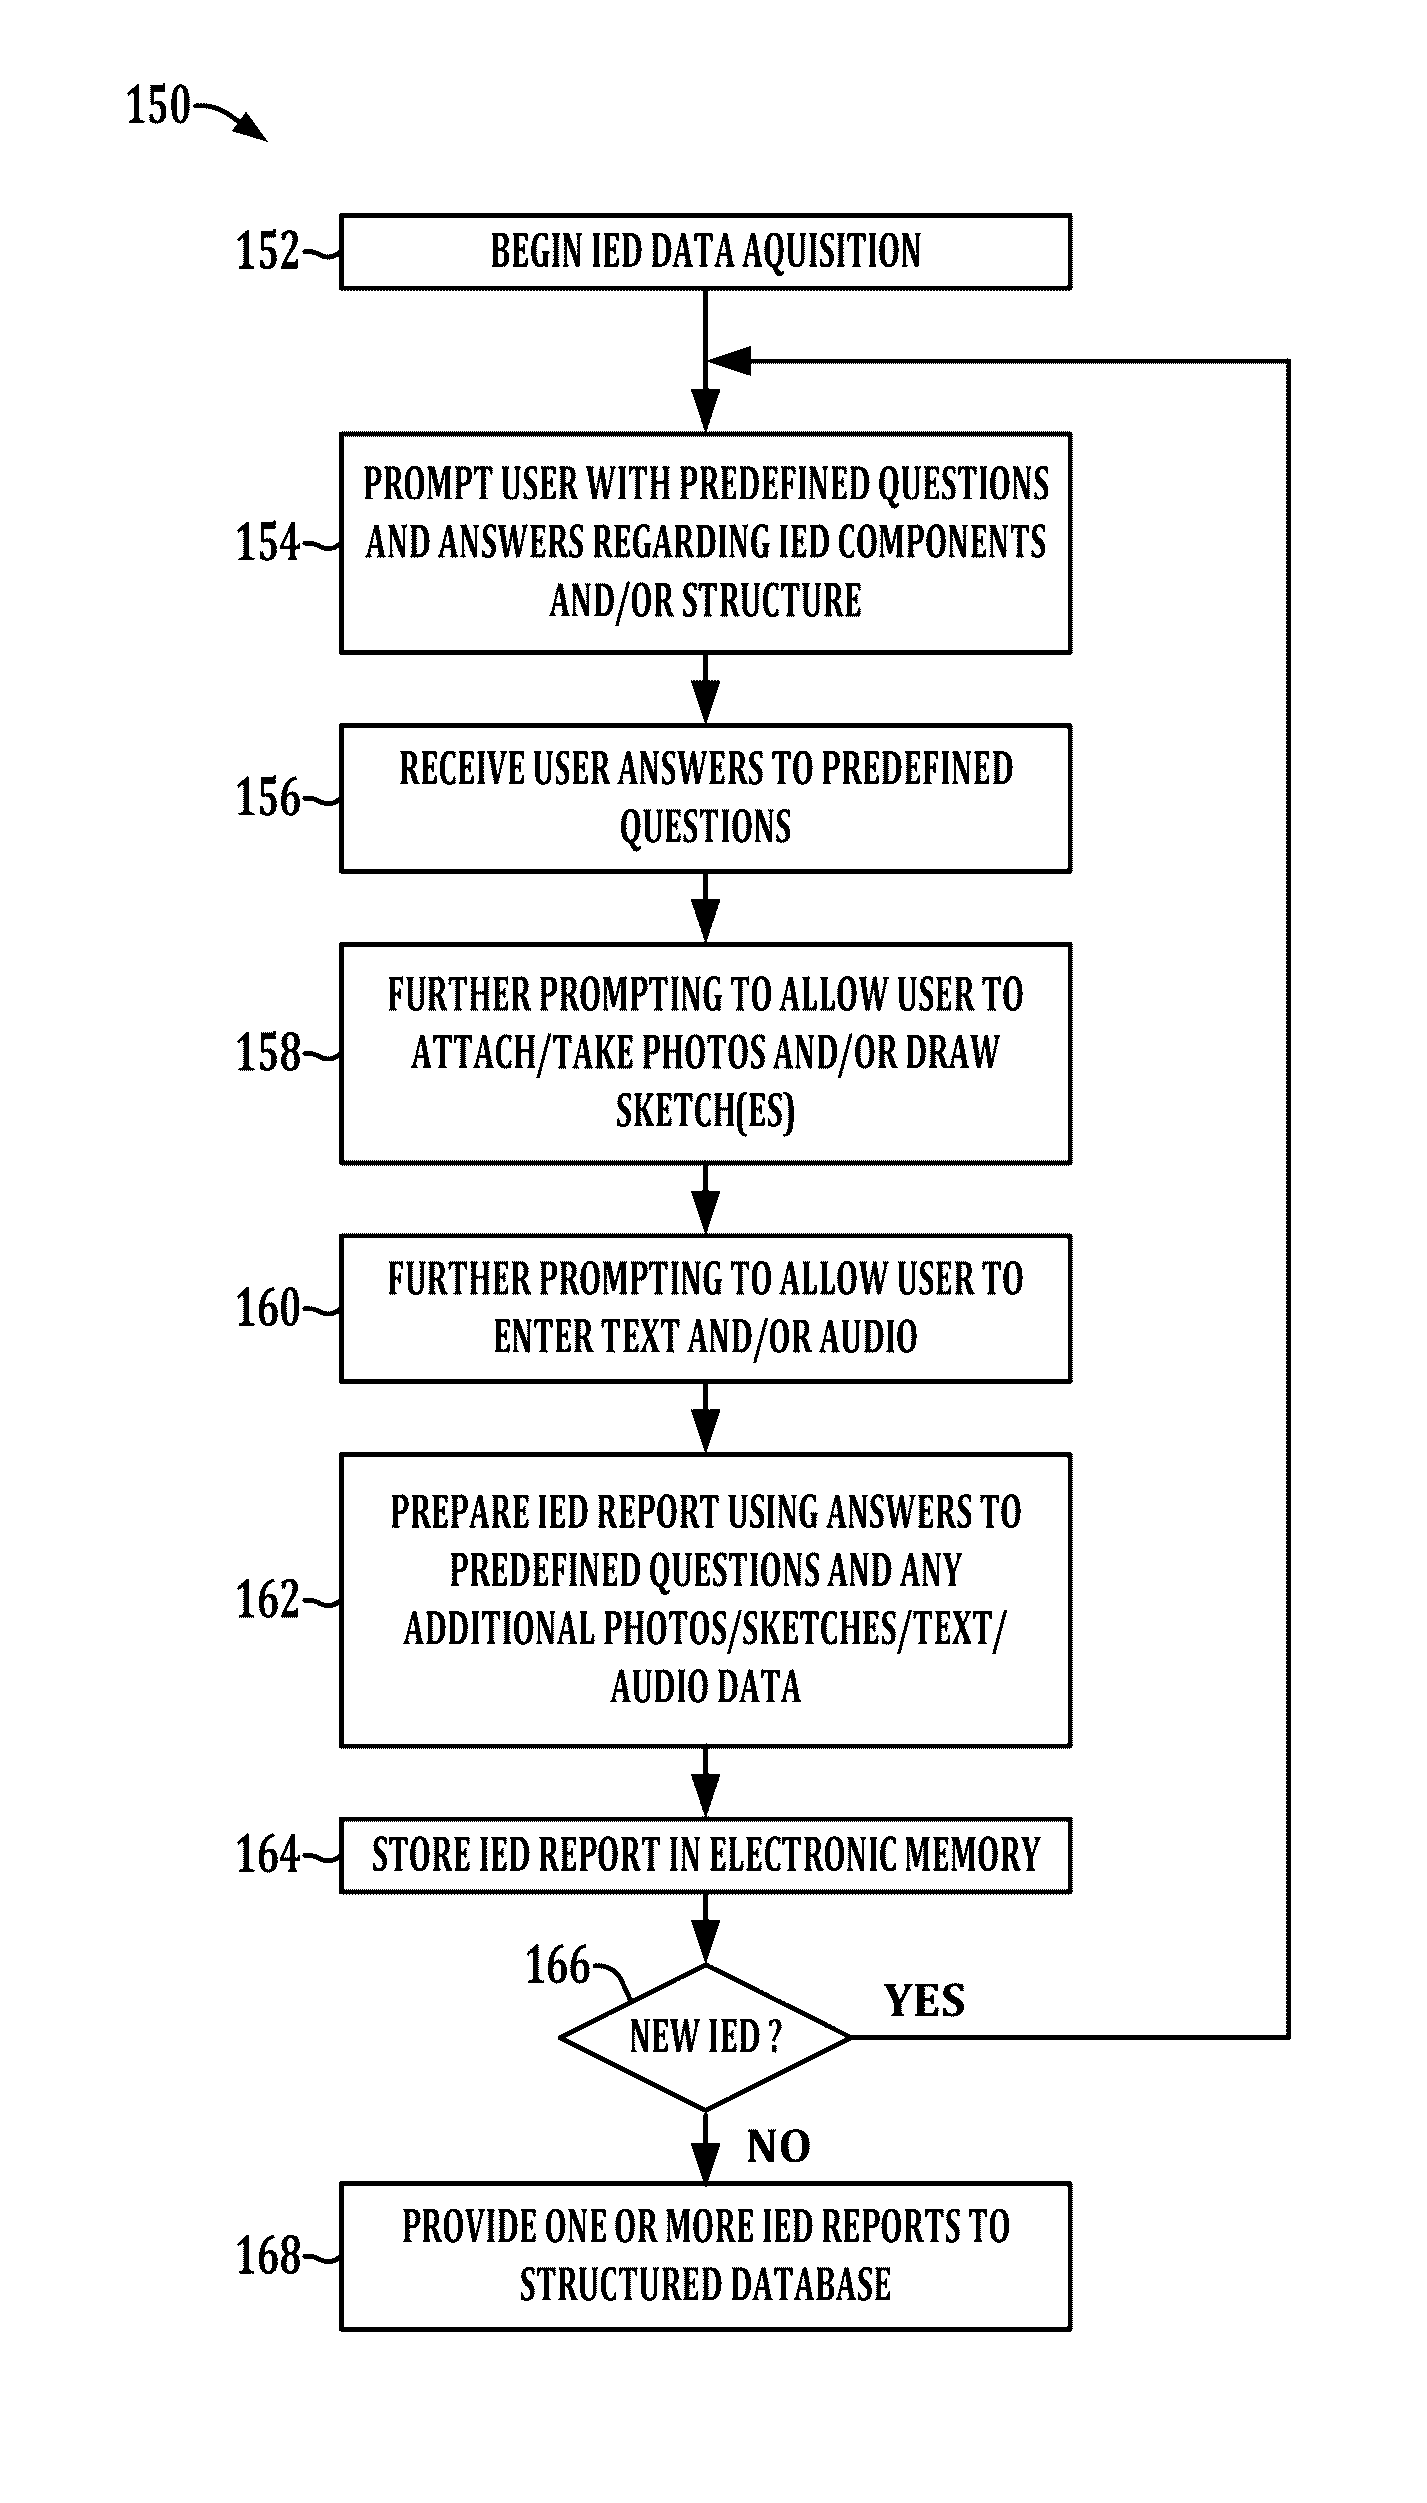 Apparatus and method for improvised explosive device (IED) network analysis